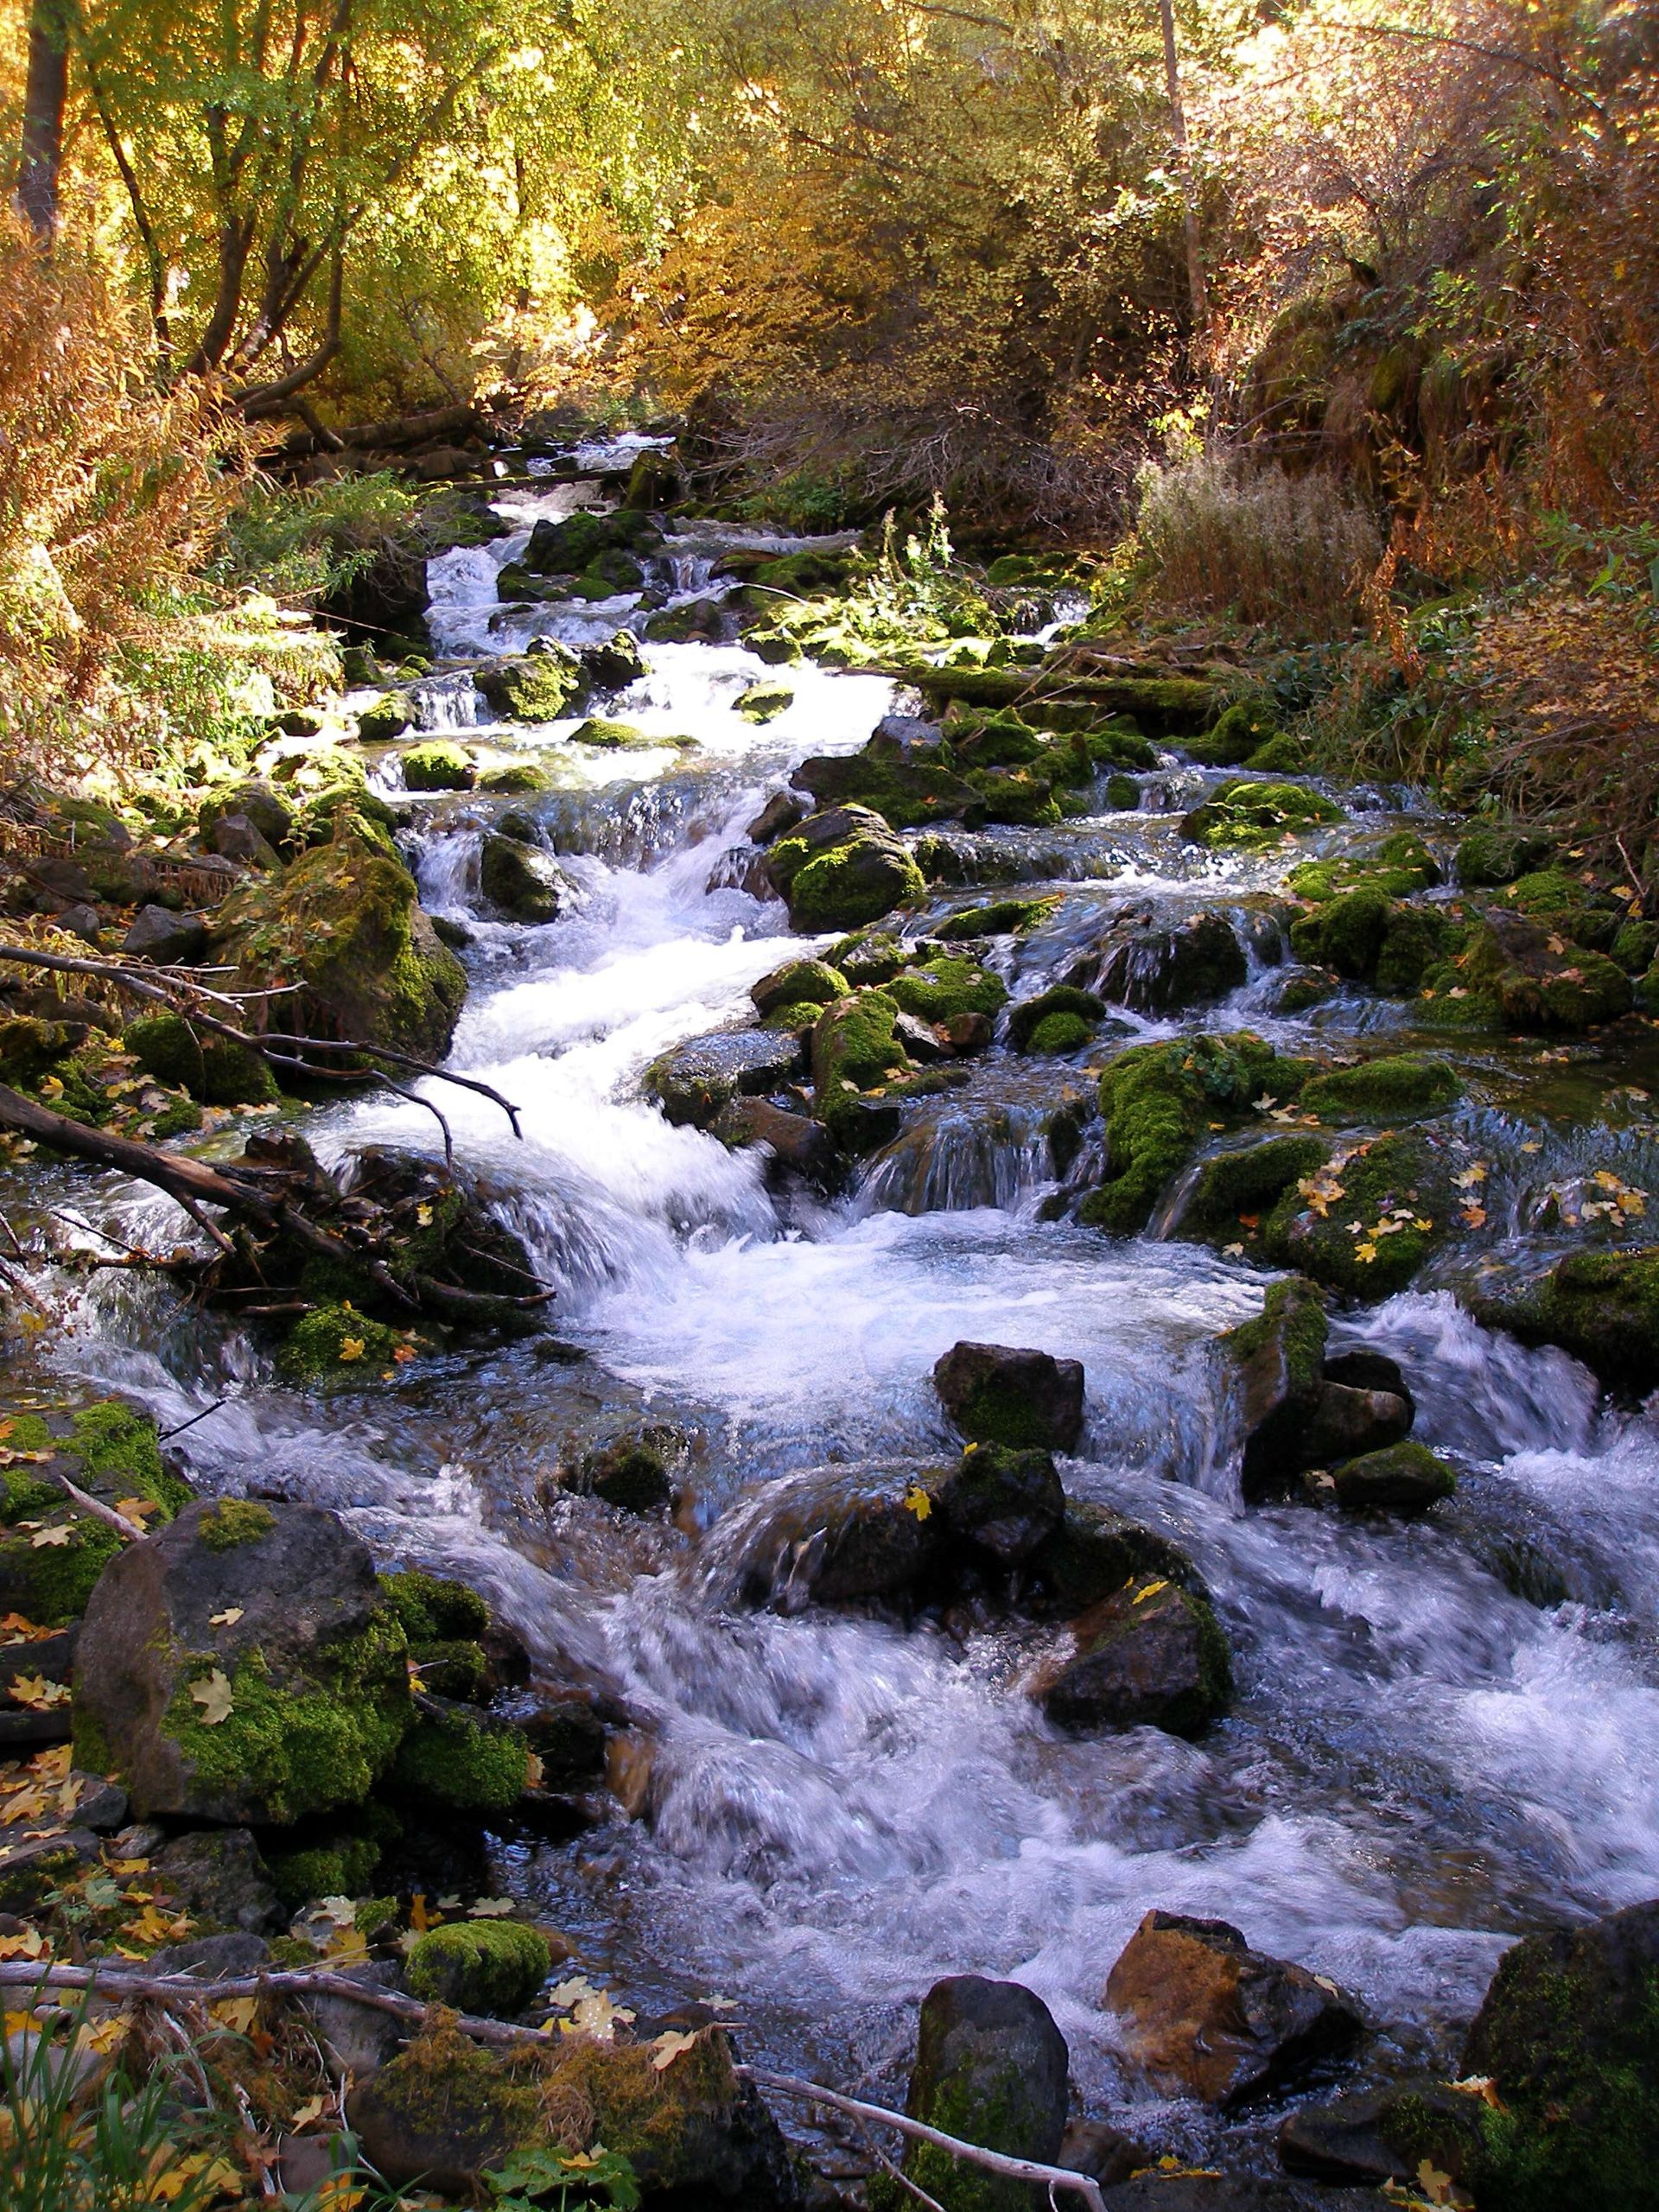 A river runs over rocks near trees with autumn leaves.